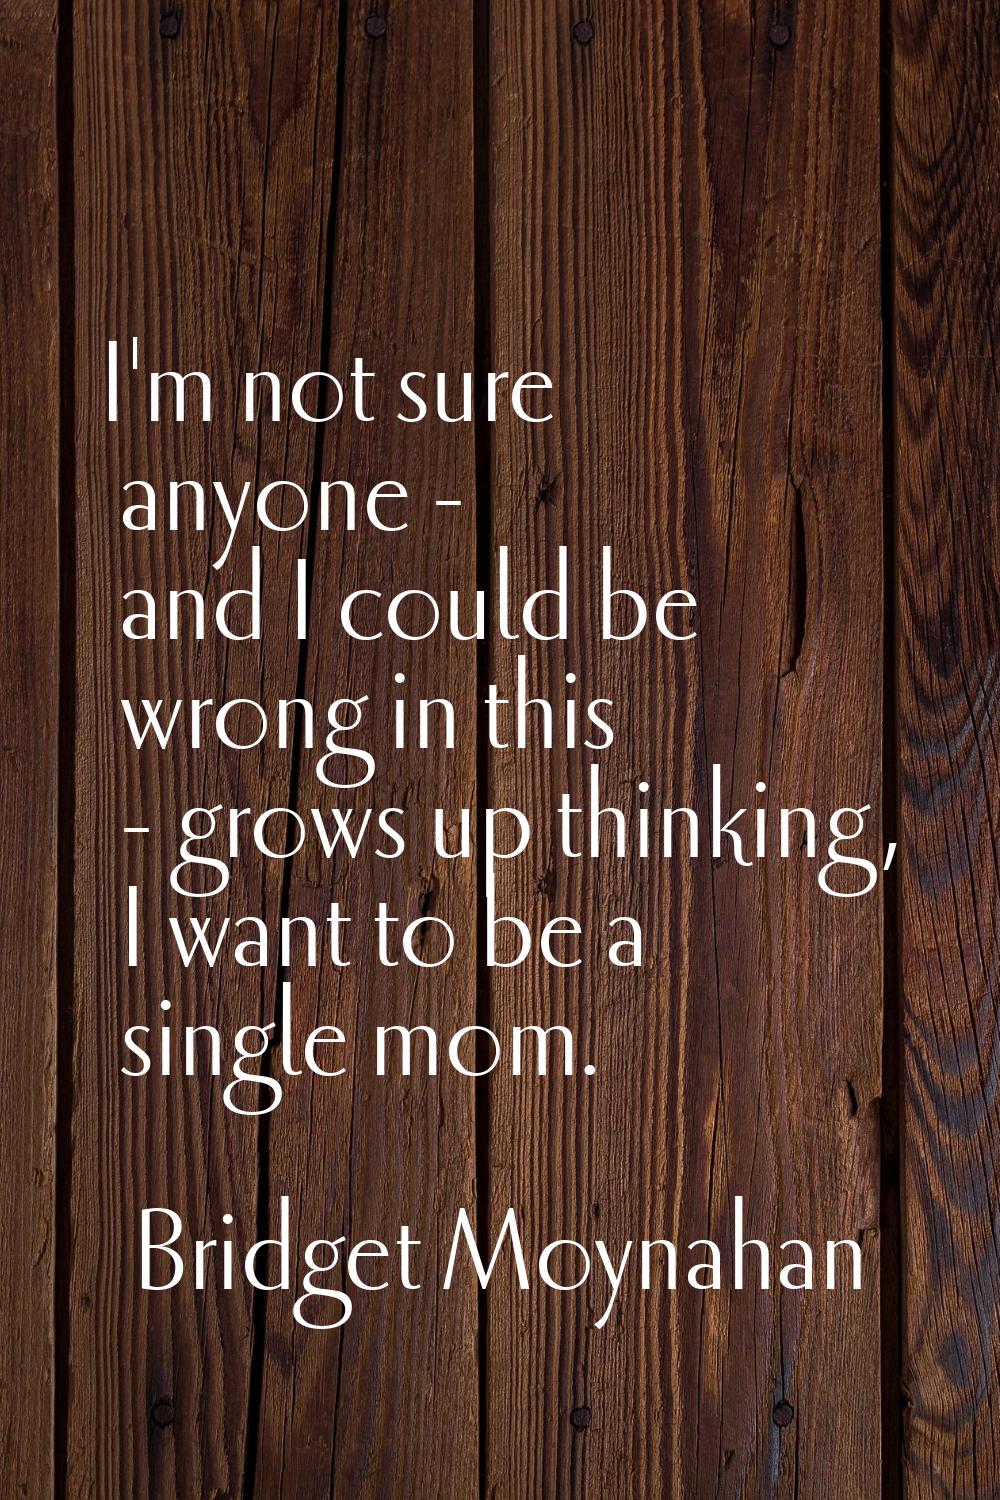 I'm not sure anyone - and I could be wrong in this - grows up thinking, I want to be a single mom.